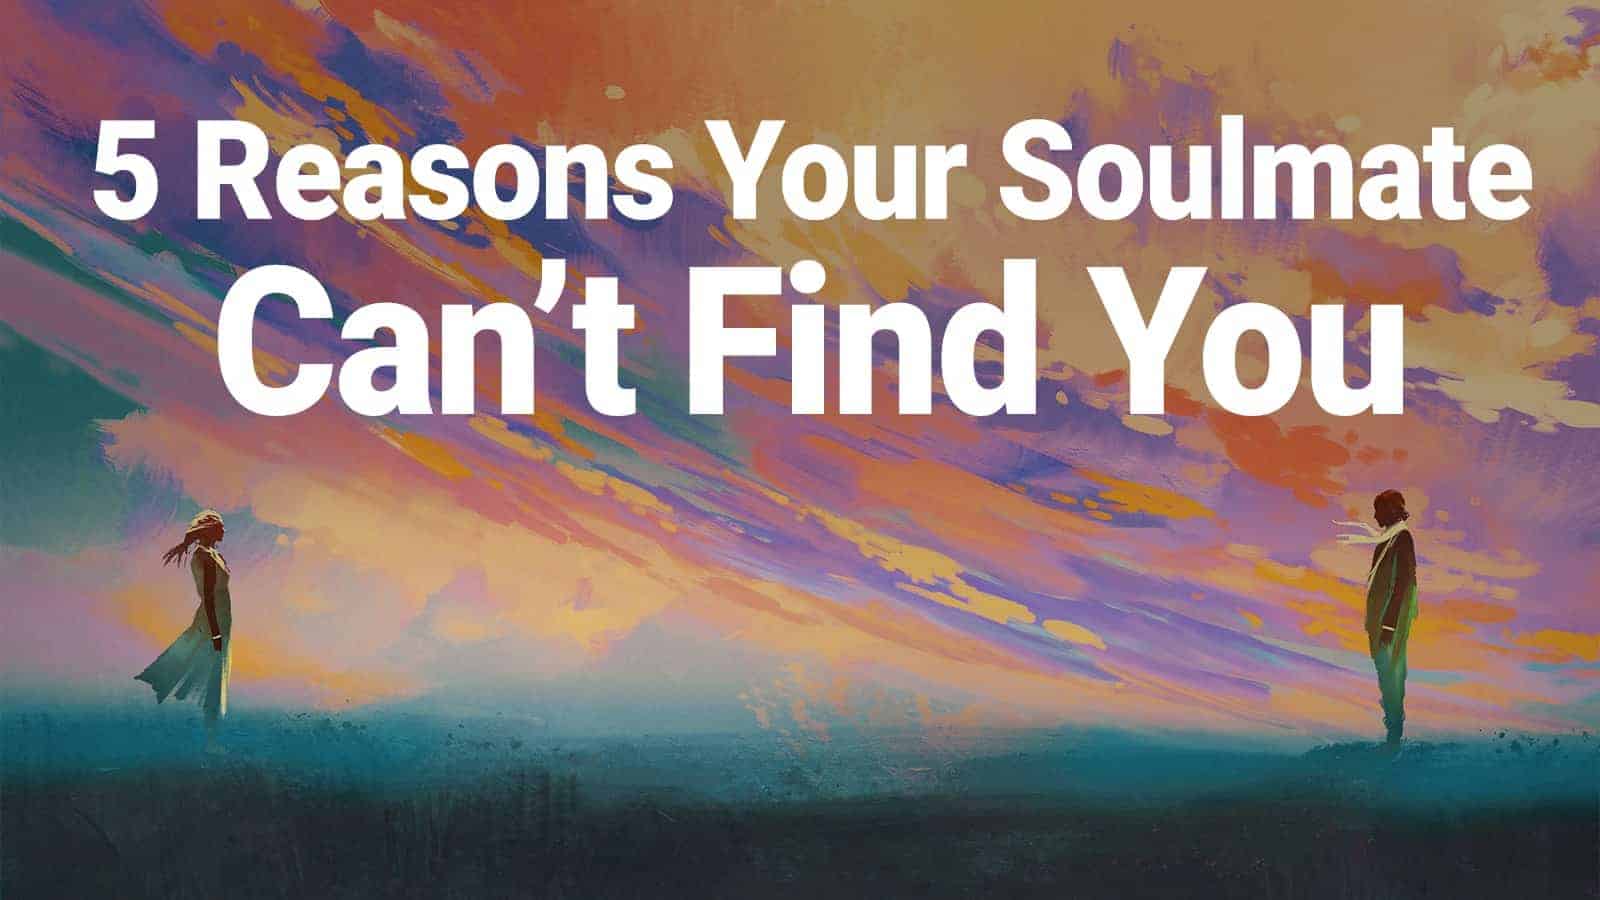 5 Reasons Your Soulmate Can’t Find You